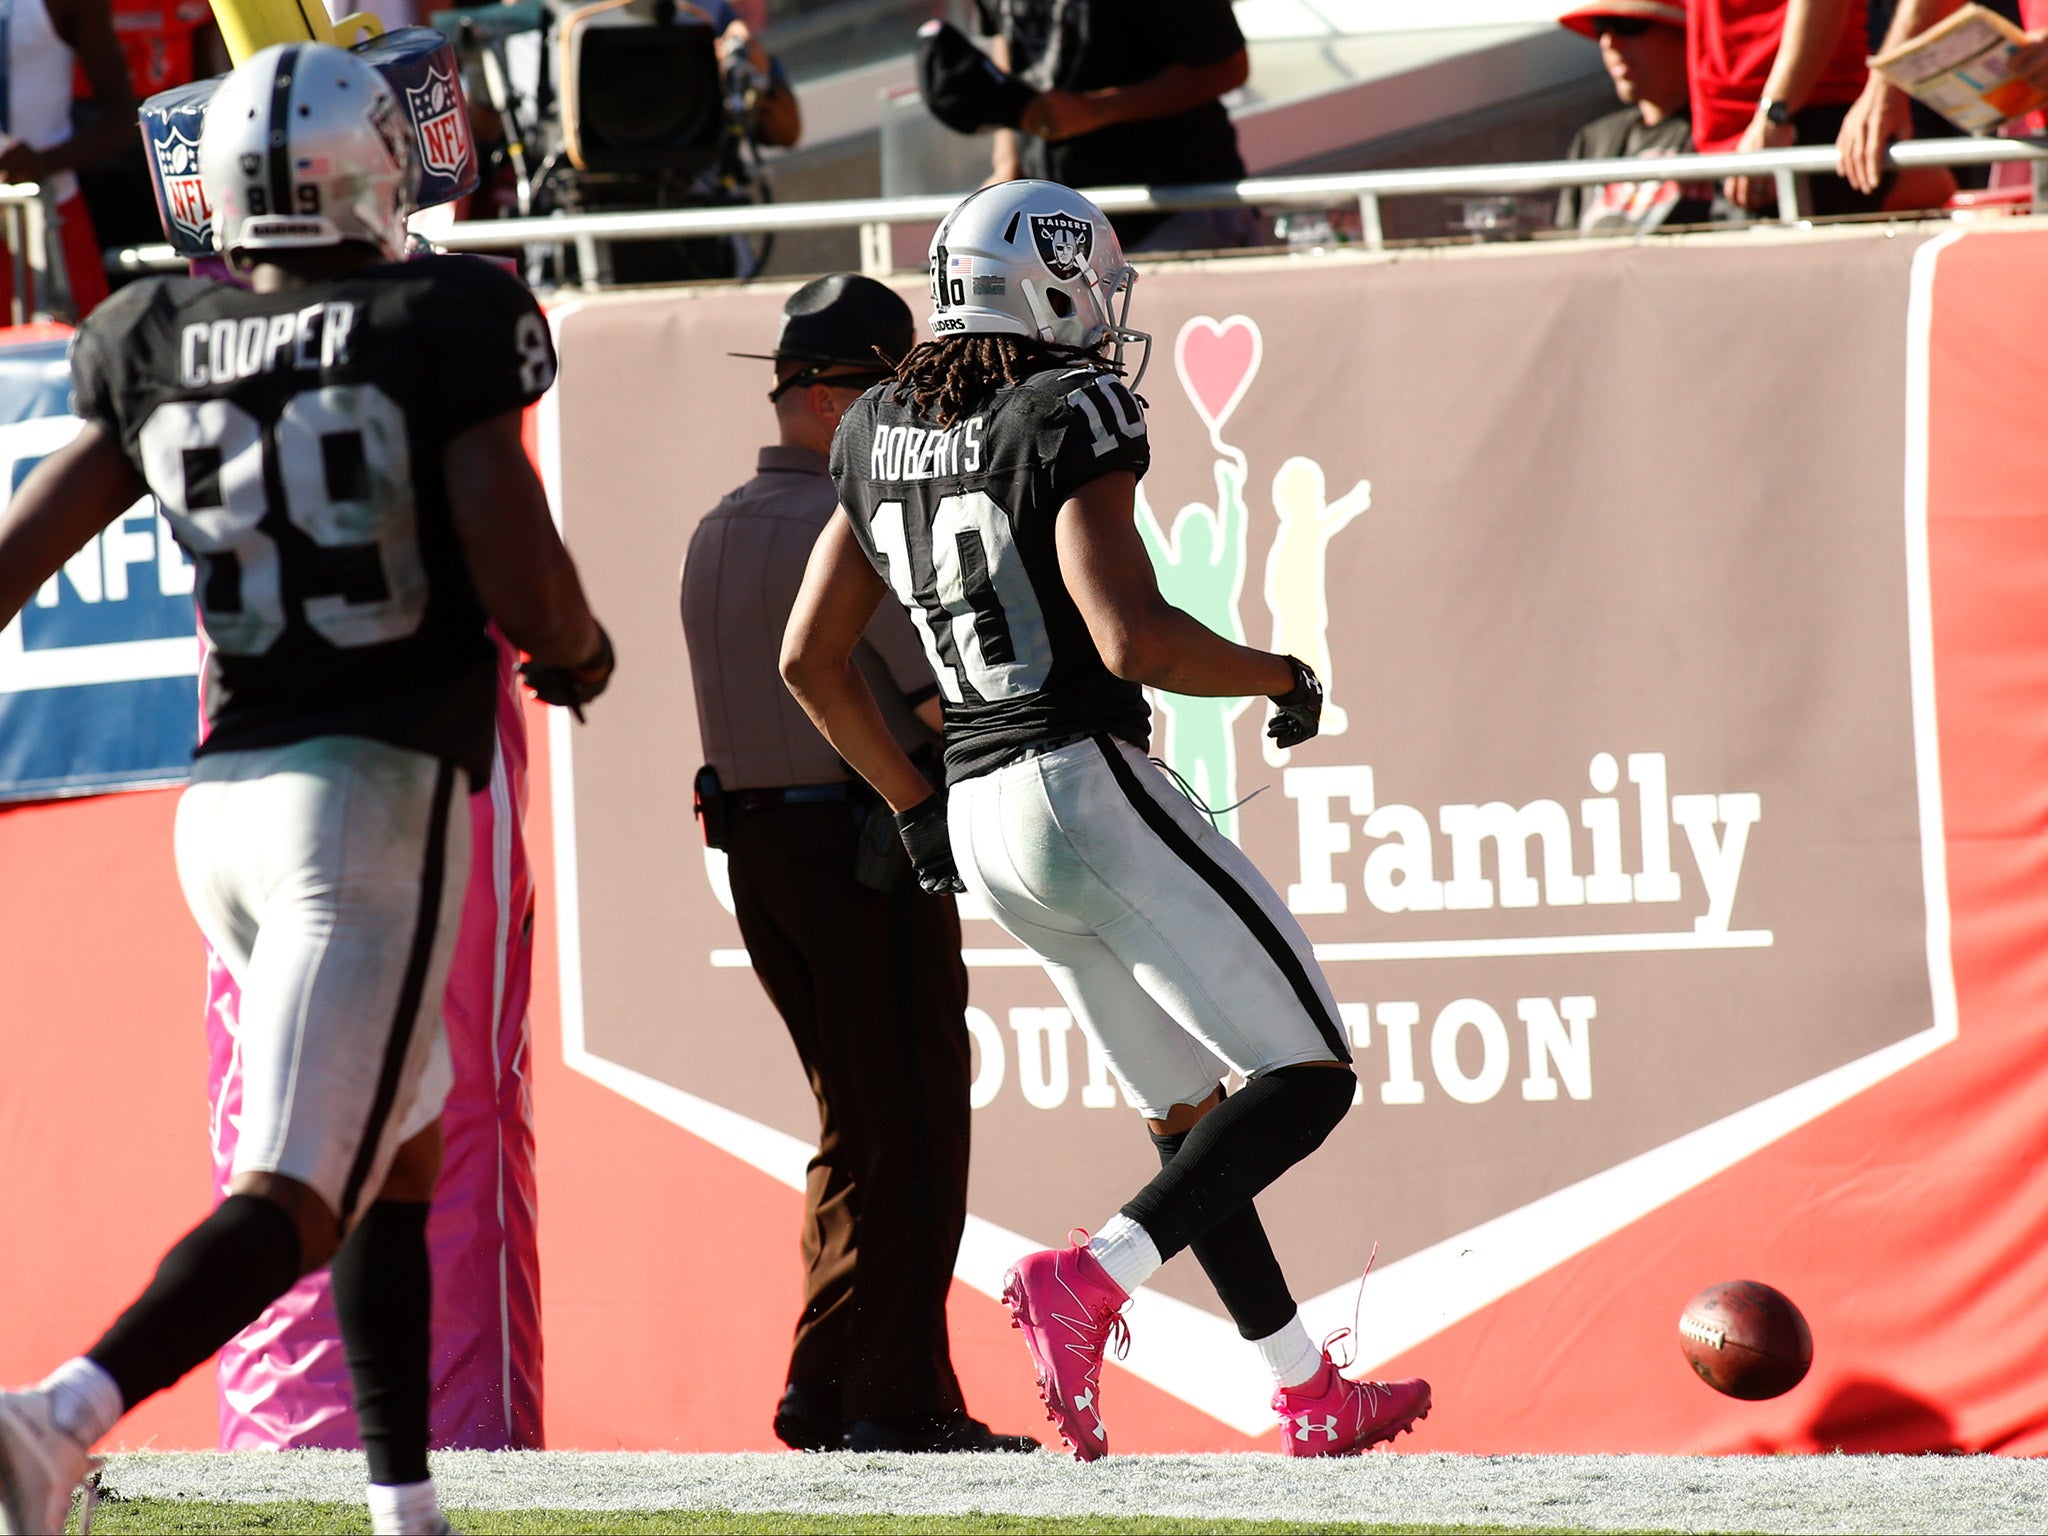 Derek Carr's 41-yard touchdown pass to Seth Roberts secured a 30-24 win for Oakland in overtime